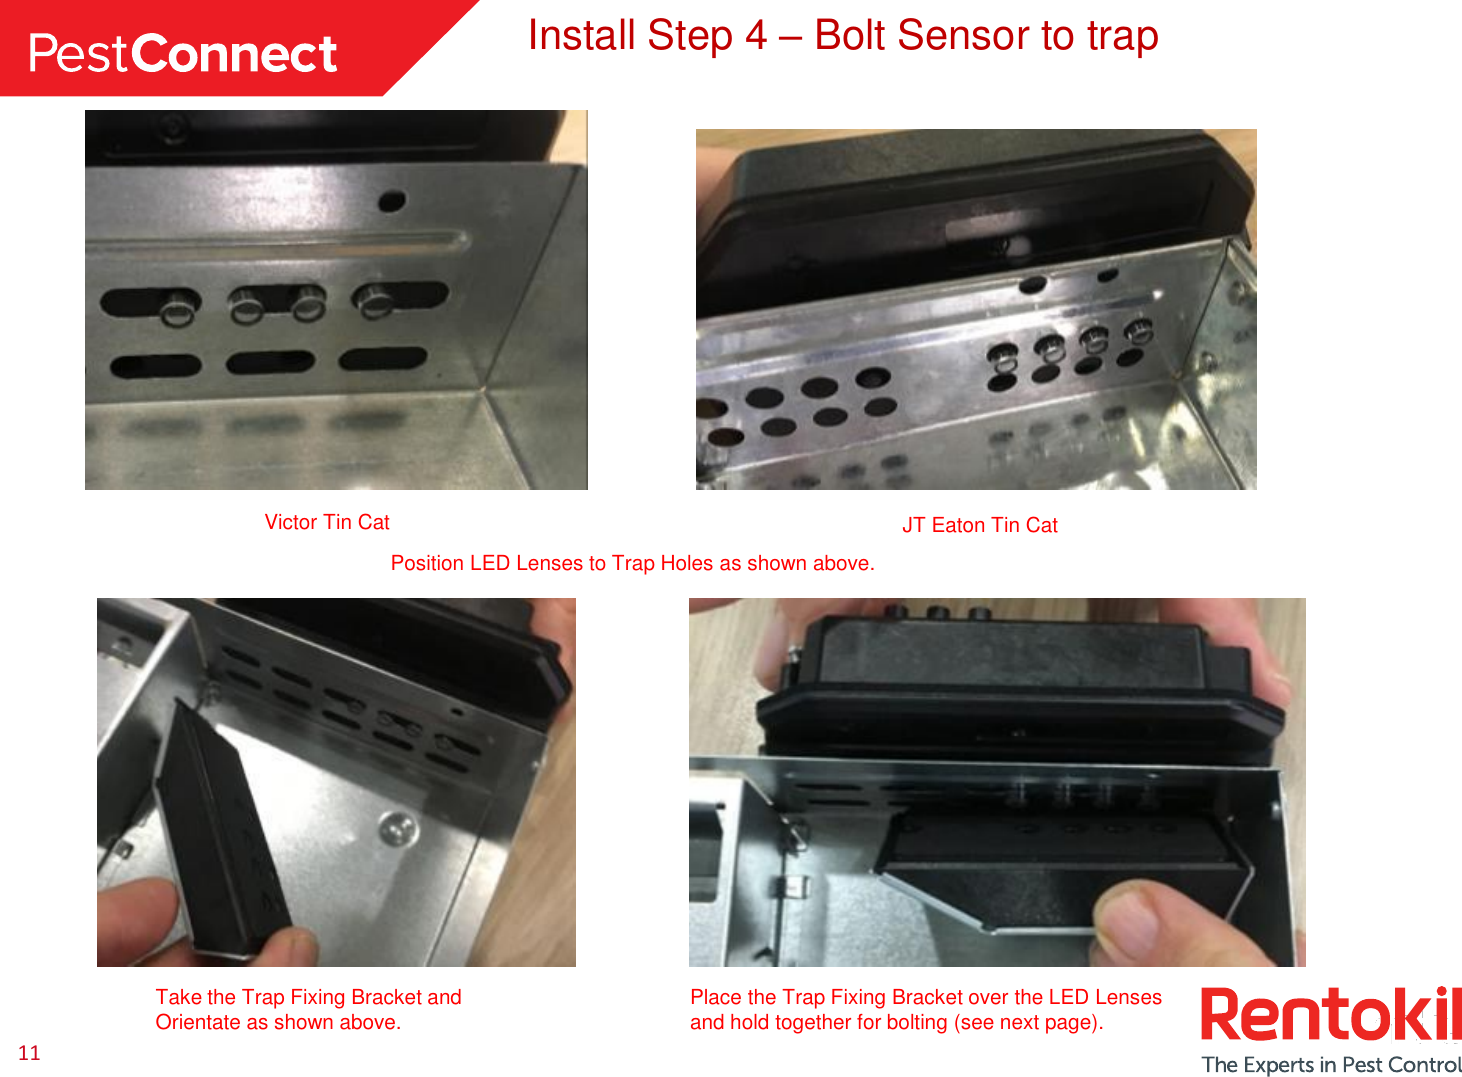 11 Install Step 4 – Bolt Sensor to trap Position LED Lenses to Trap Holes as shown above. Take the Trap Fixing Bracket and Orientate as shown above.  Place the Trap Fixing Bracket over the LED Lenses and hold together for bolting (see next page). JT Eaton Tin Cat Victor Tin Cat 